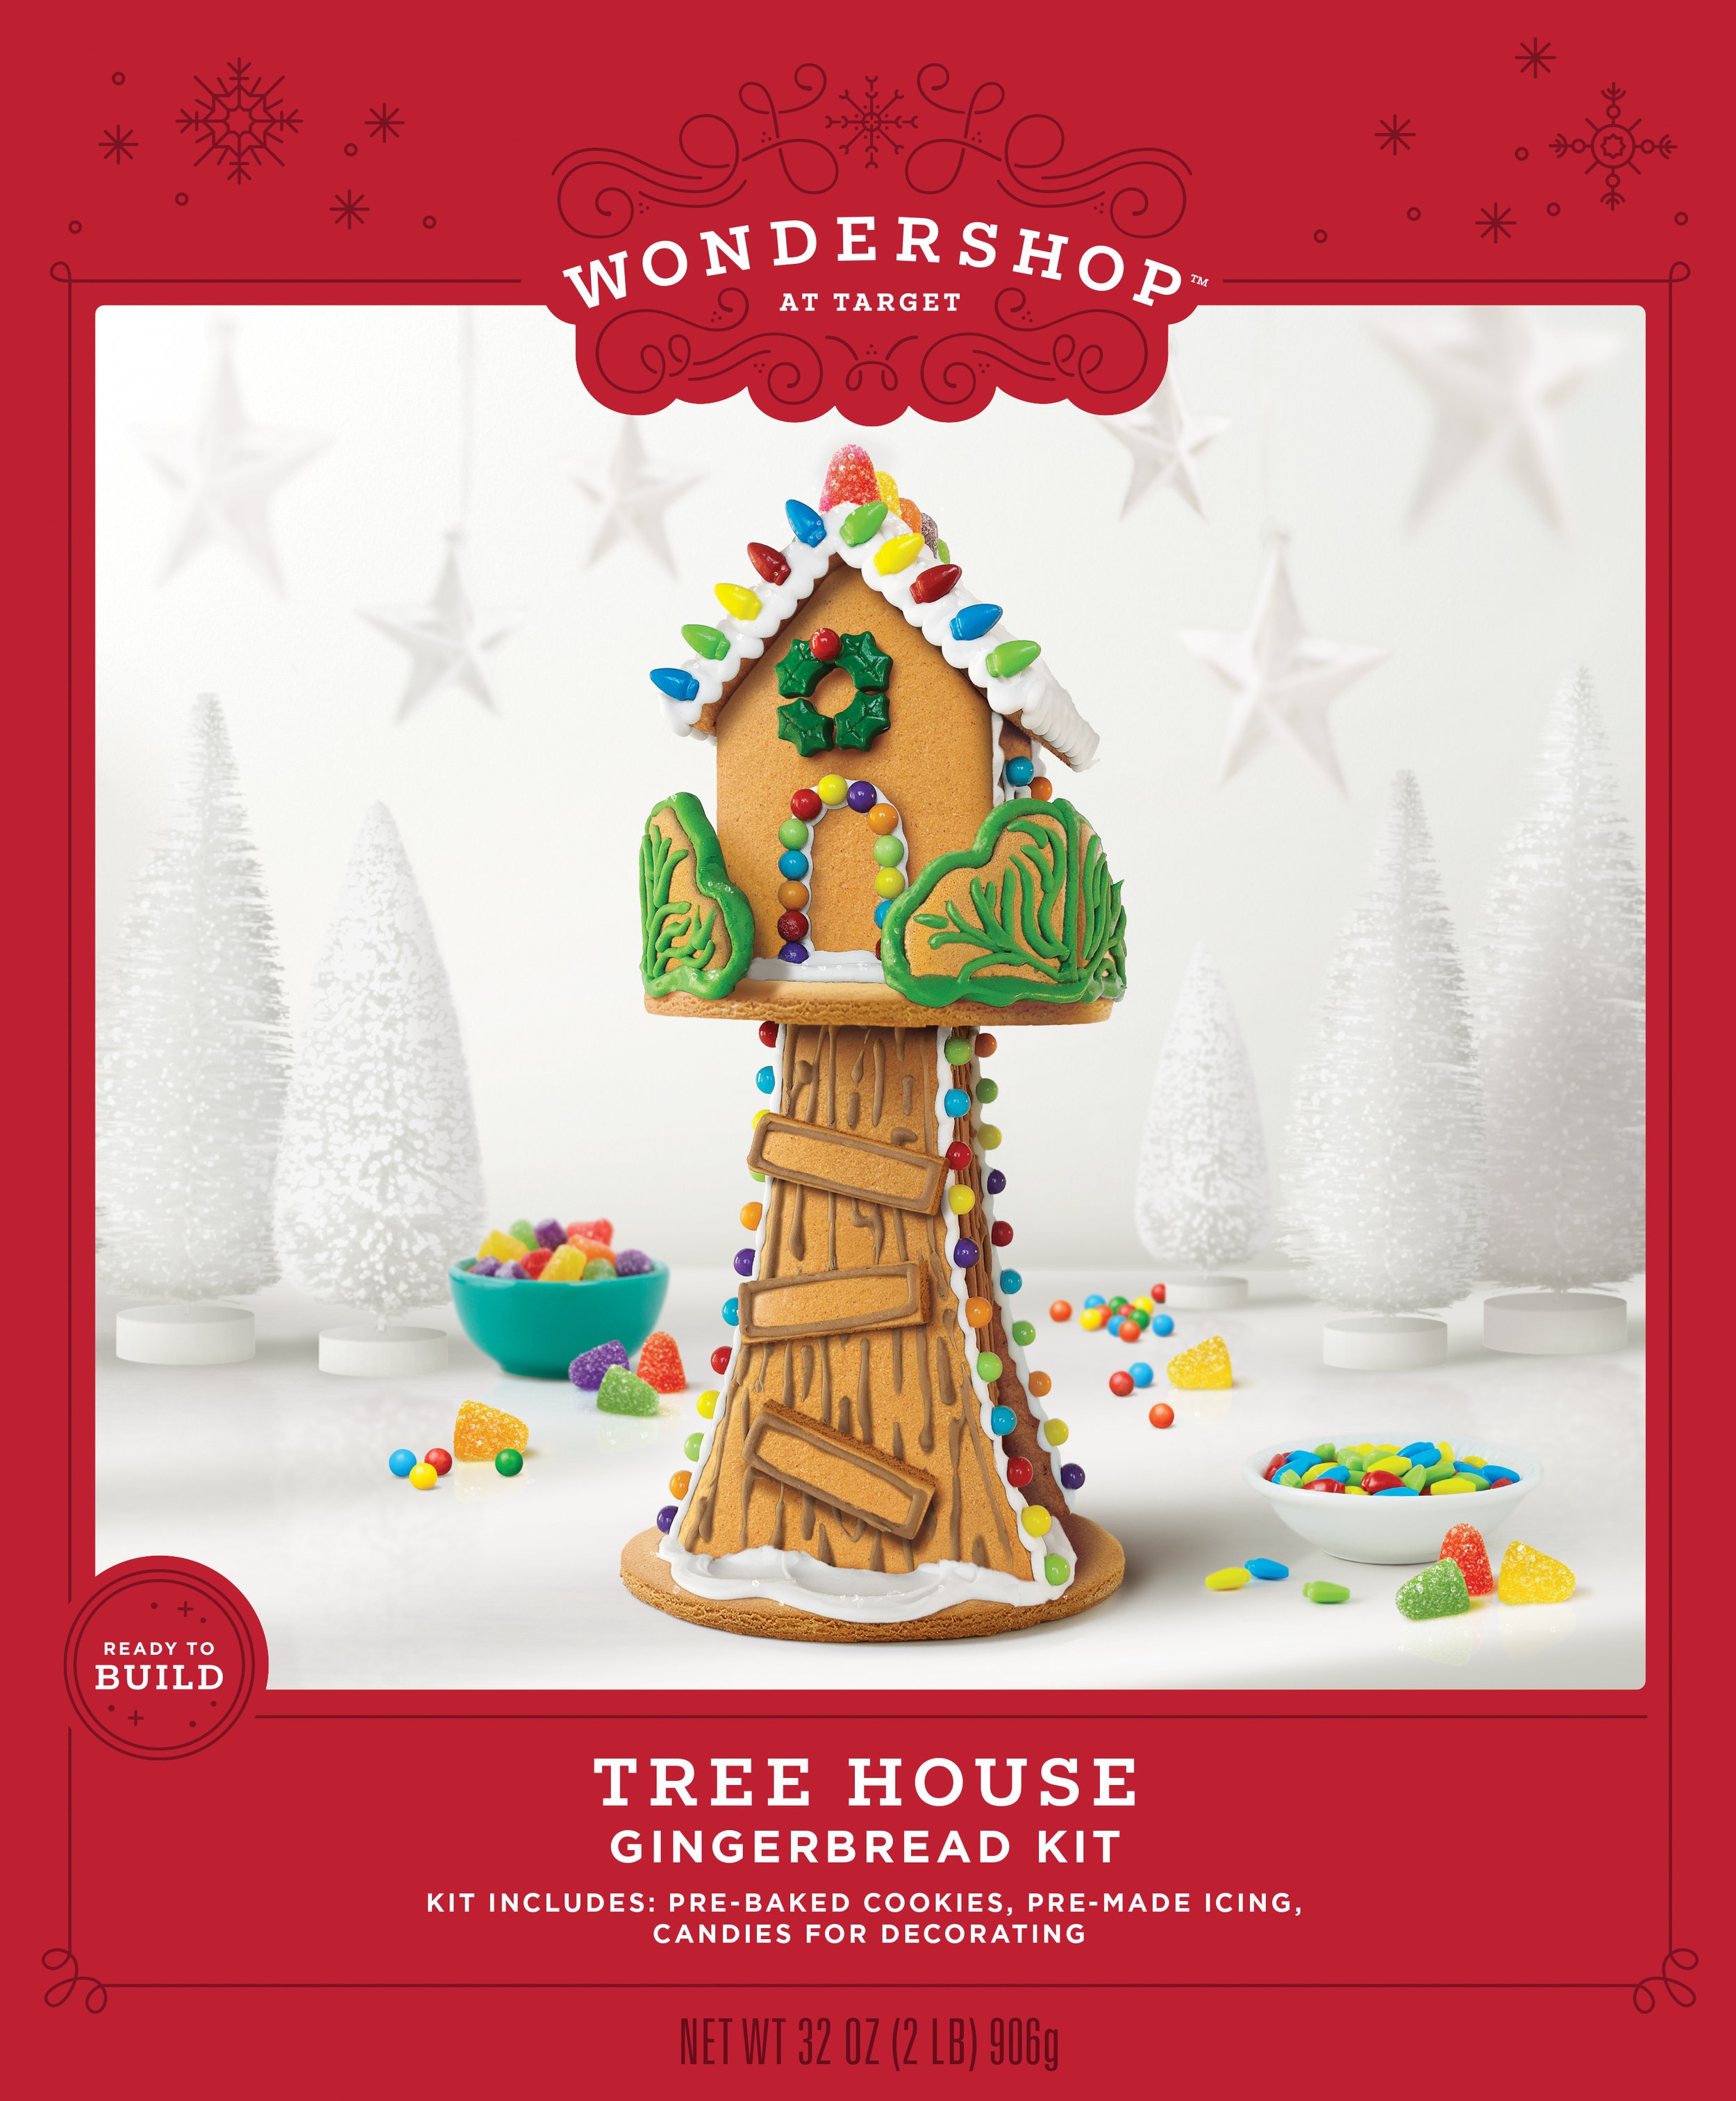 C-001225-01-292_32_D55_WS_Candy_JP_and_Gifting_Tree_House_Create_A_Treat_VERT_Final_01.jpg